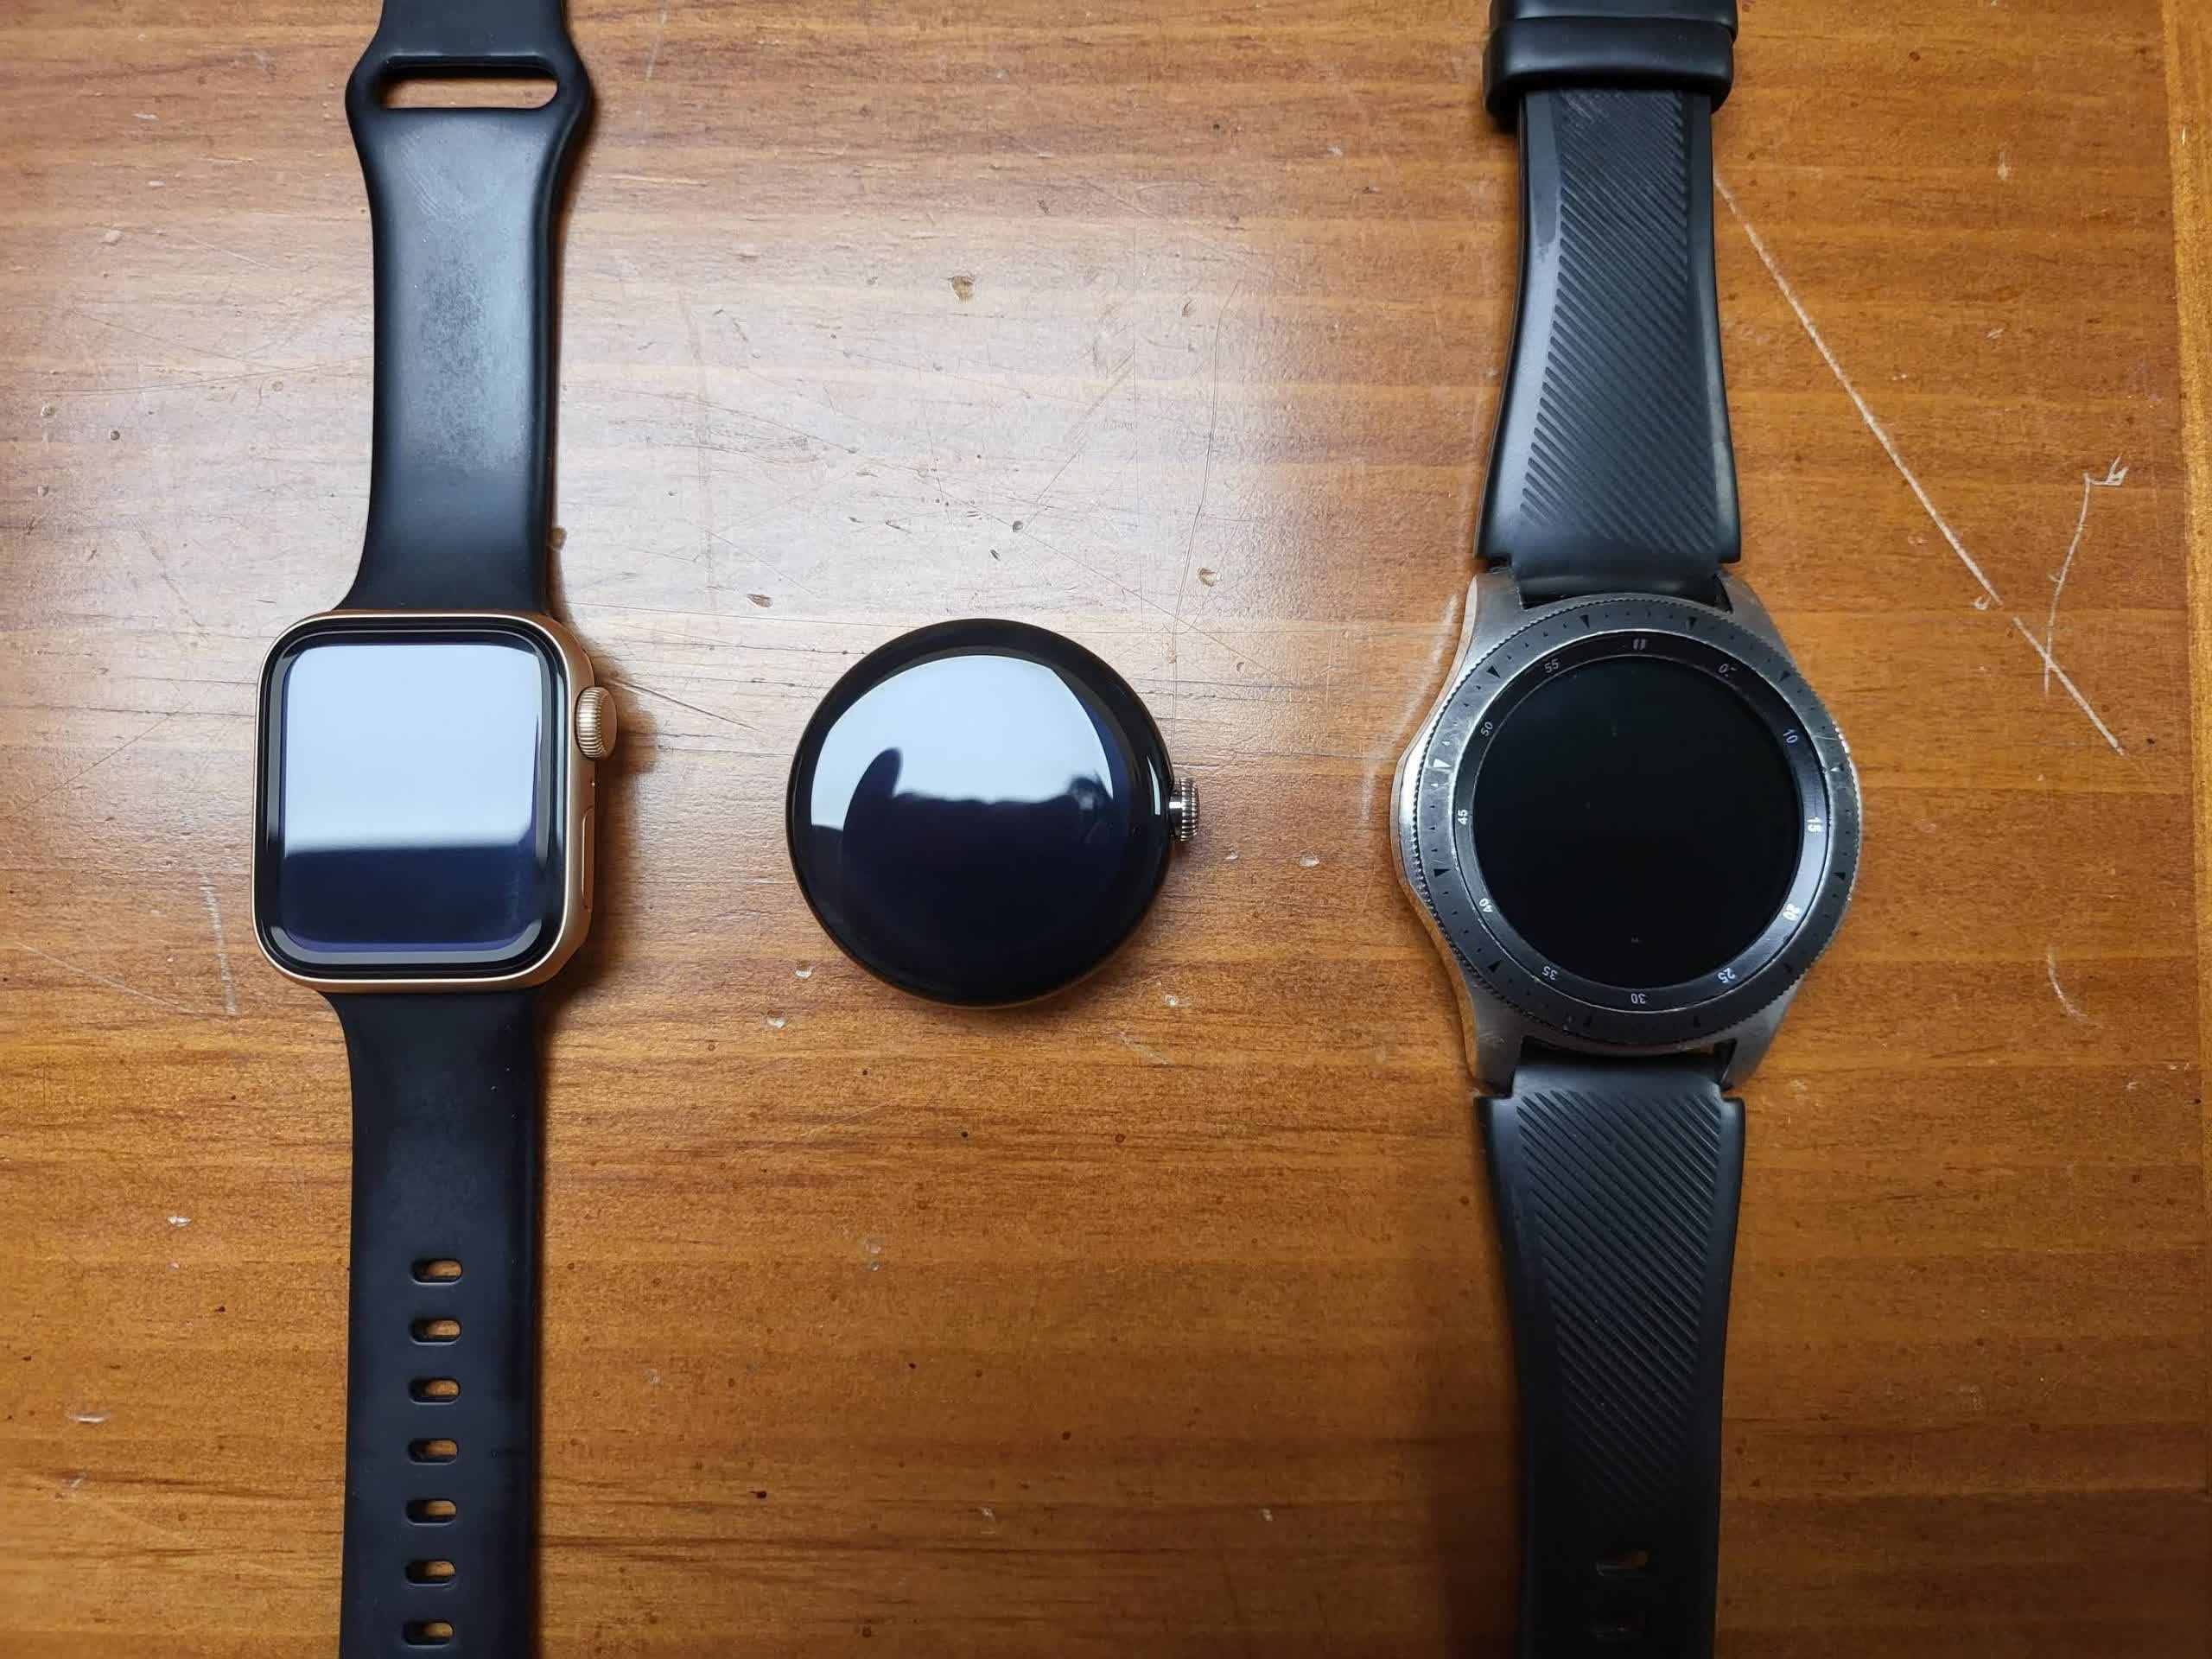 Google Pixel Watch photos leak, confirming a rounded form factor with a crown